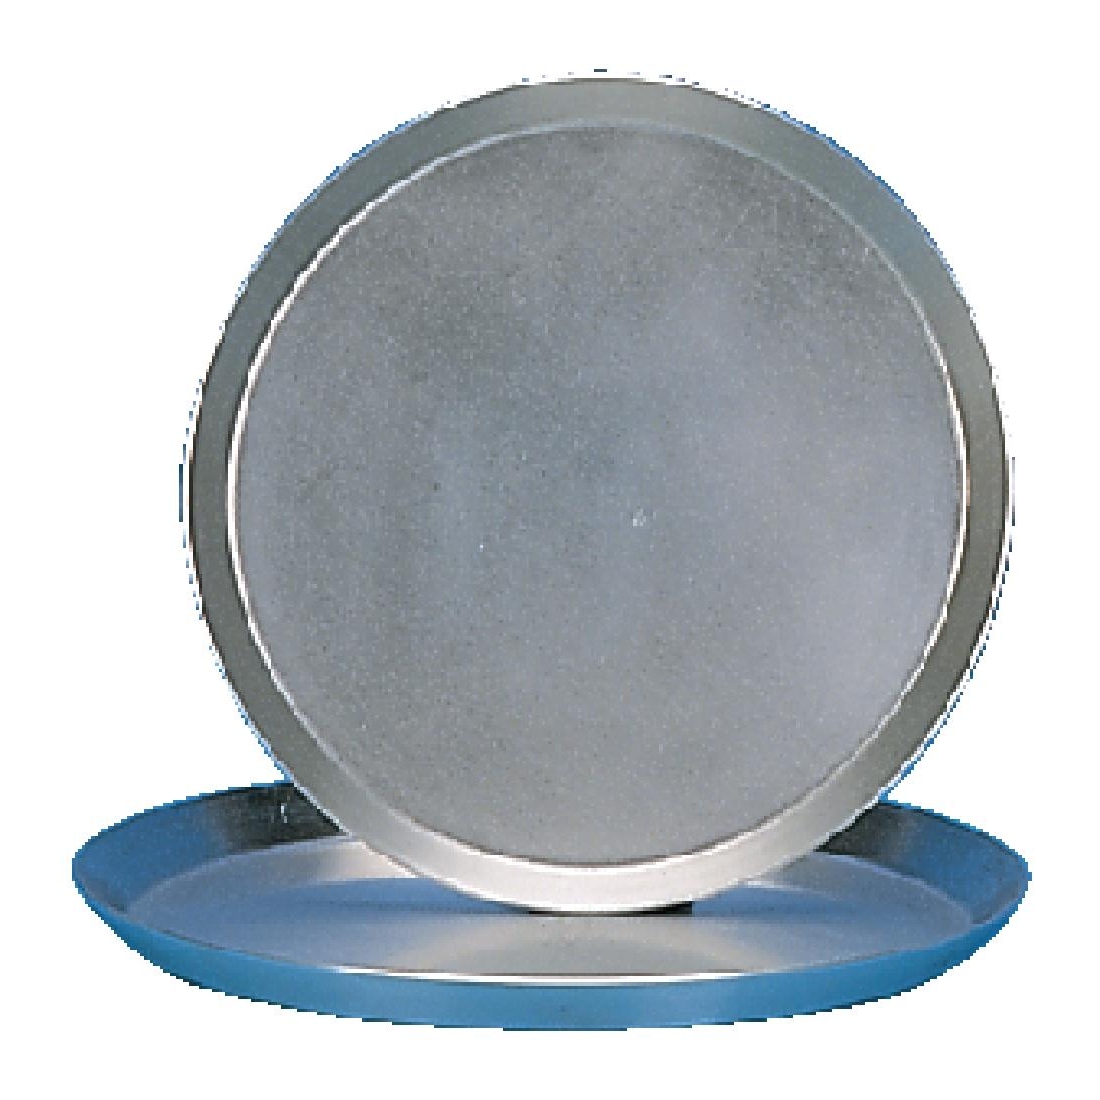 Tempered Deep Pizza Pan 9in